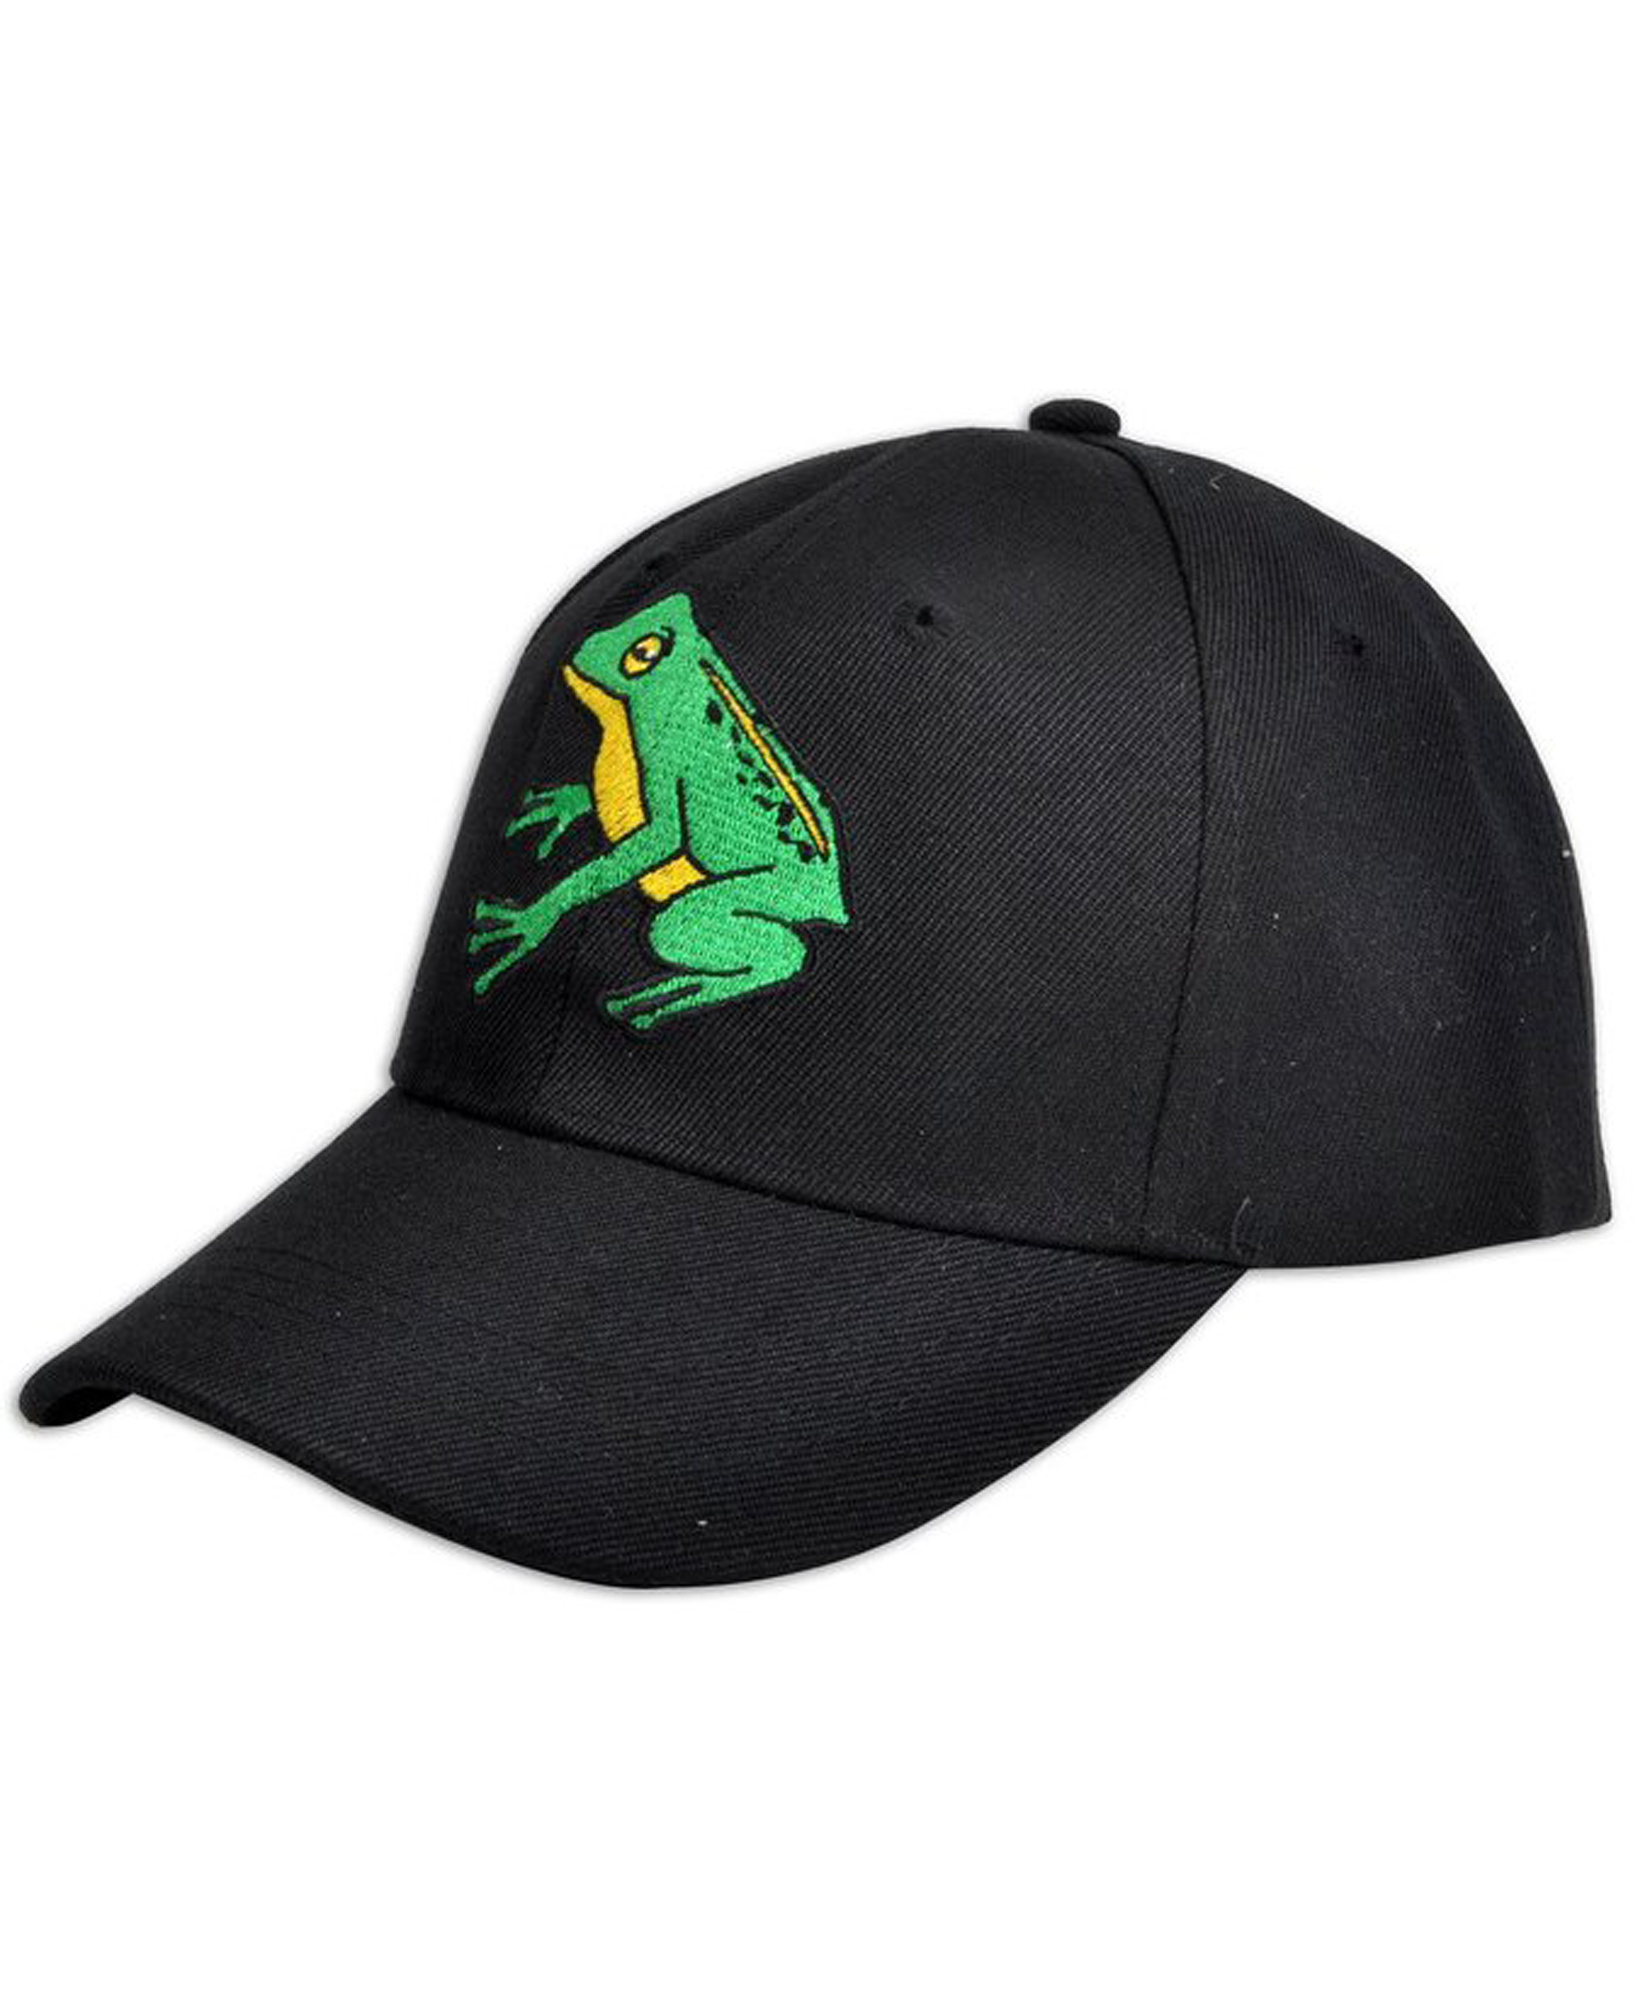 Green Frog Tree Embroidered Baseball Cap